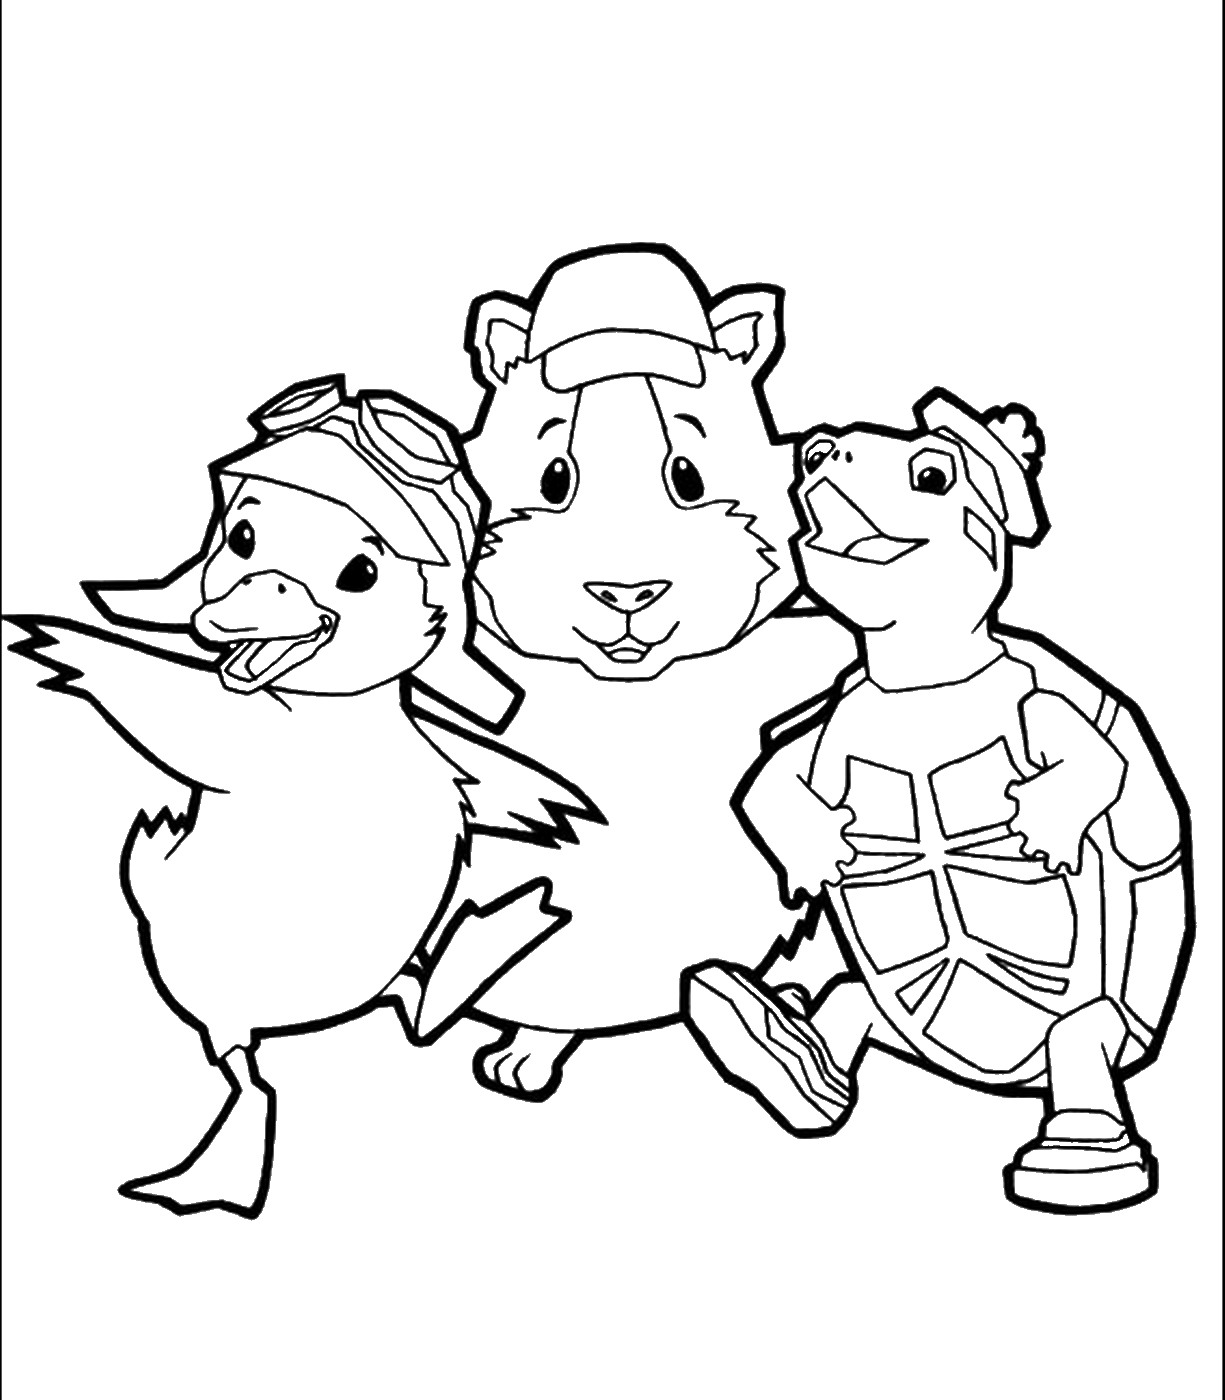 pet-coloring-pages-printable-at-getcolorings-free-printable-colorings-pages-to-print-and-color